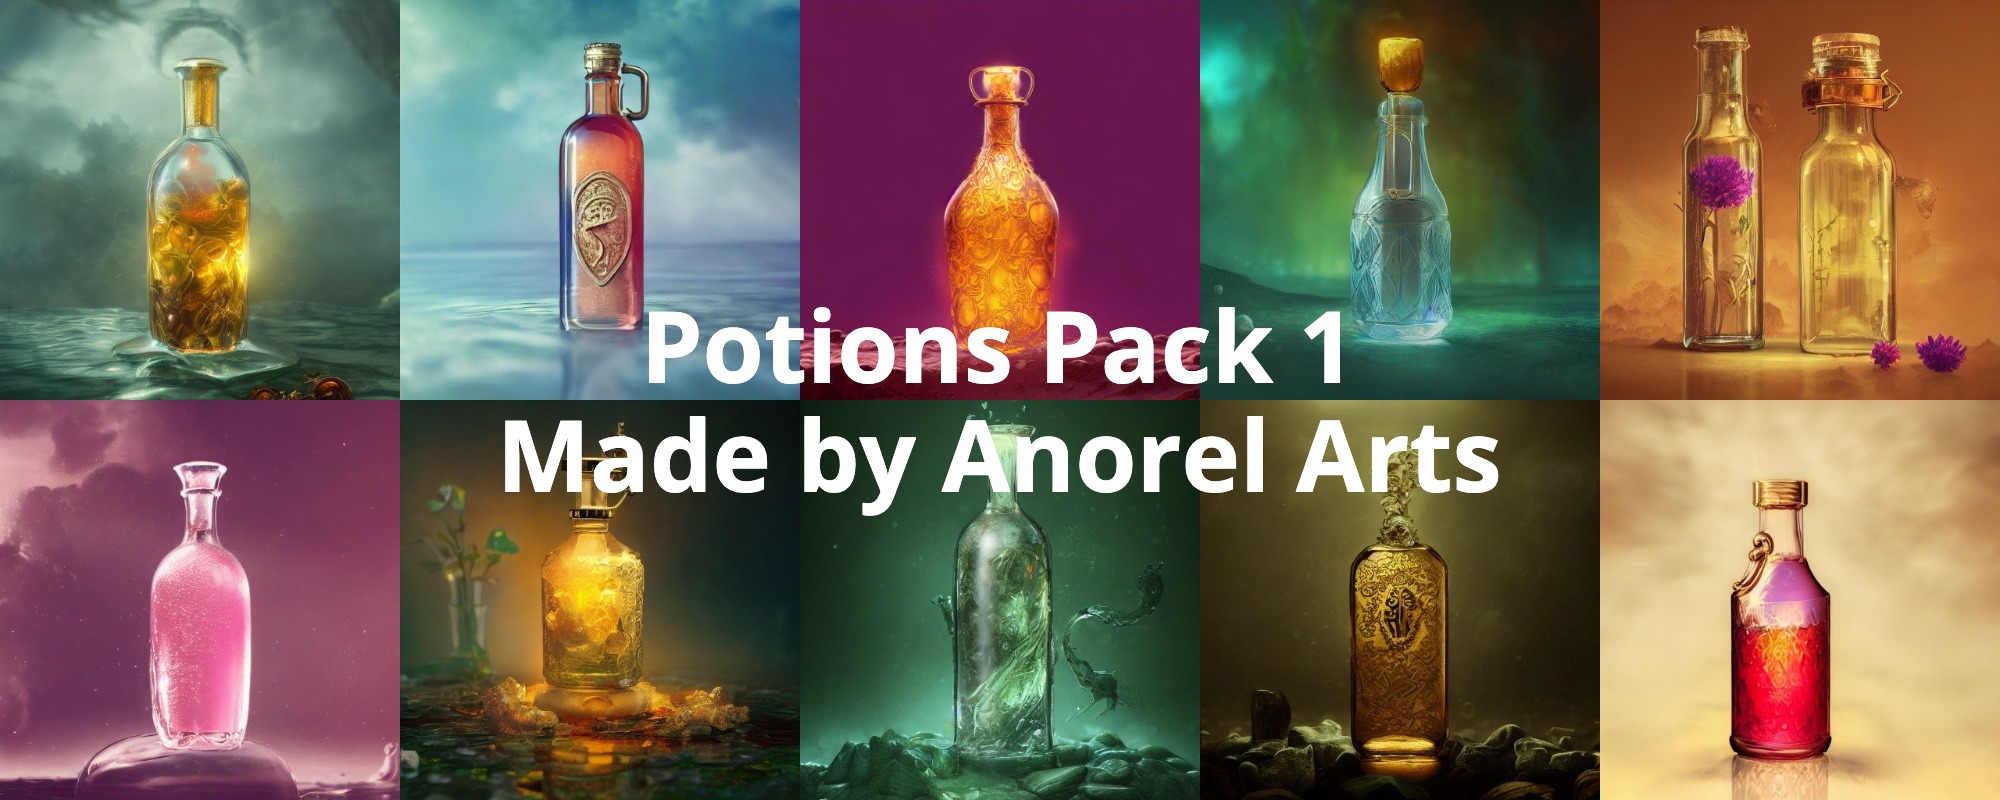 Potions Pack 1